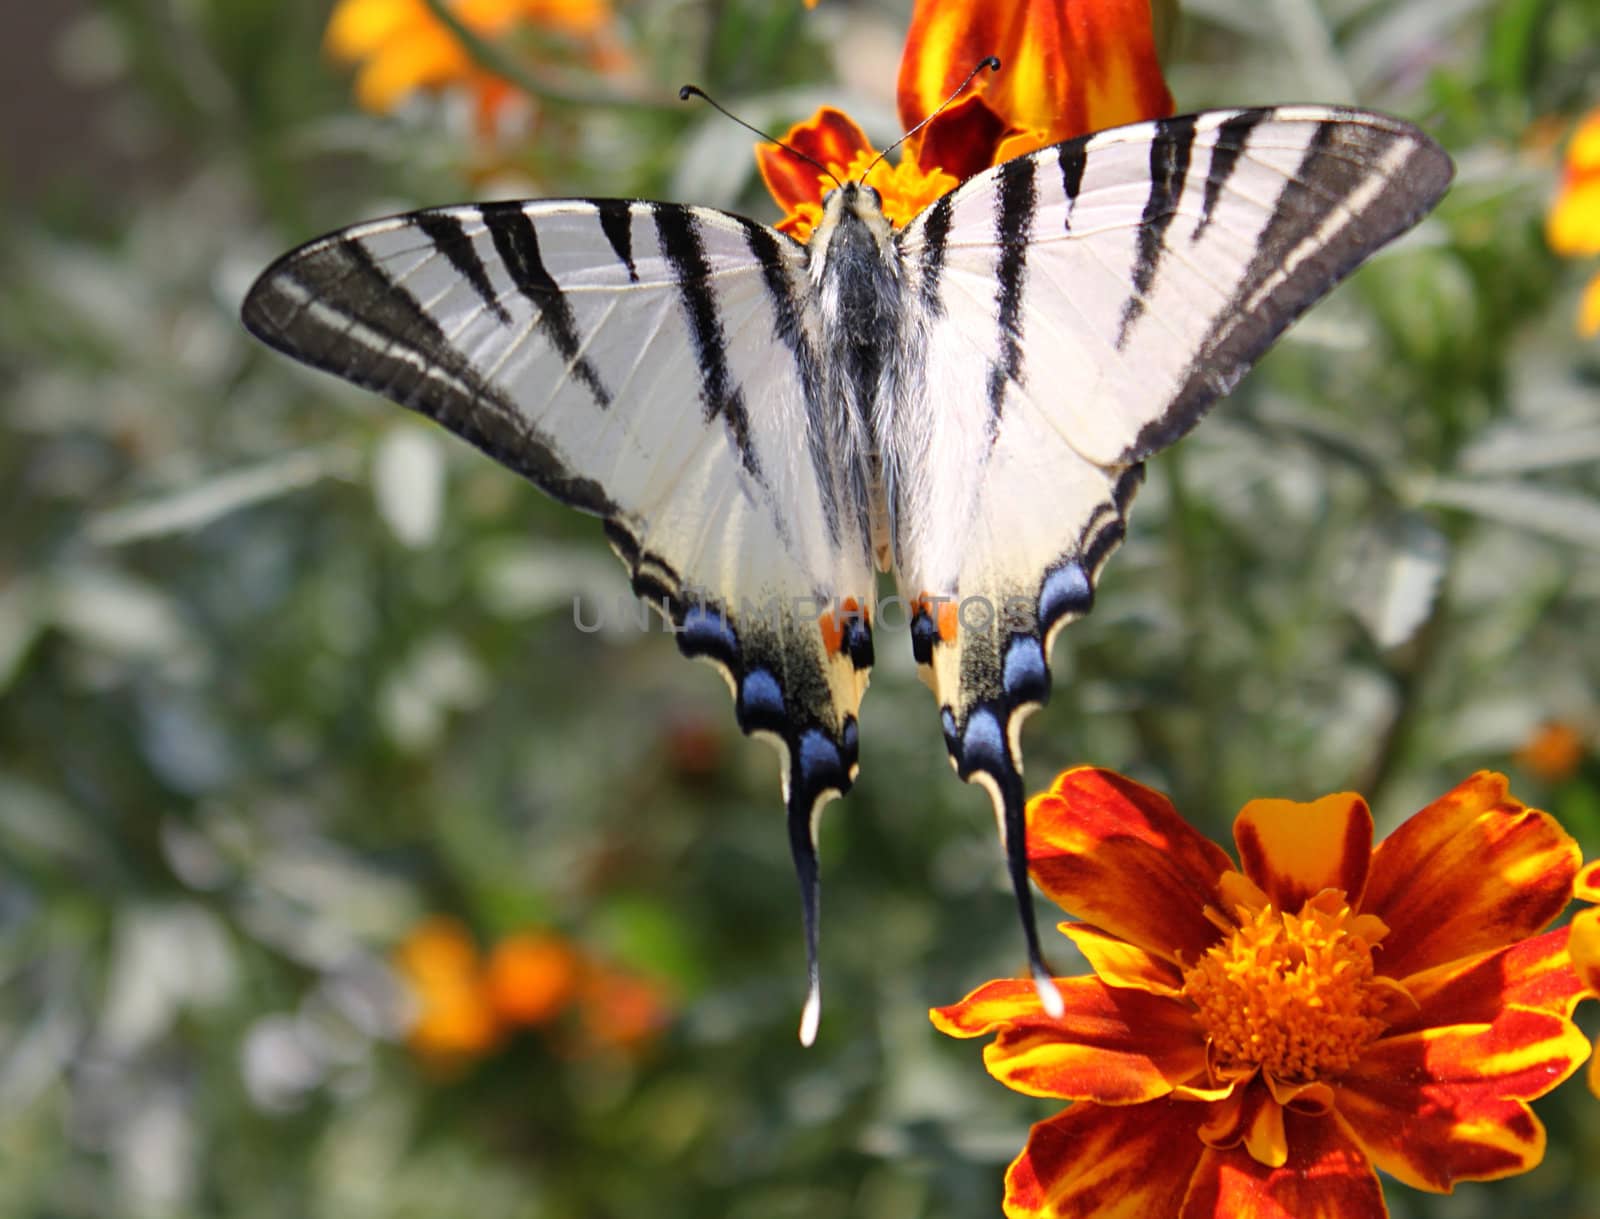 butterfly (Scarce Swallowtail) with opened wings on a flower